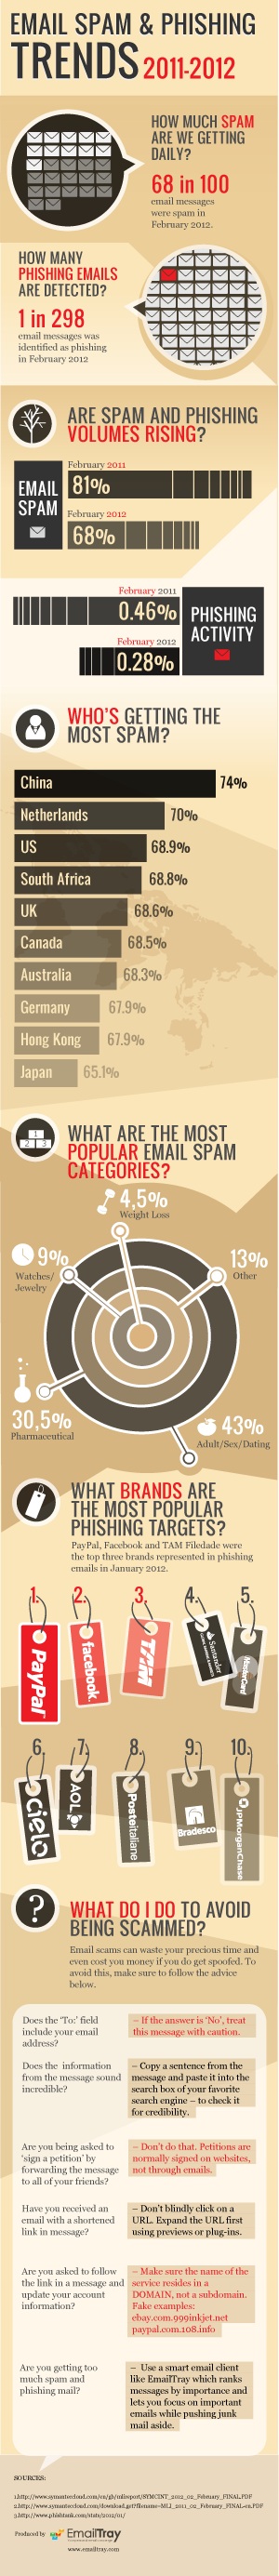 email spam and phishing trends 2011-2012 infographic